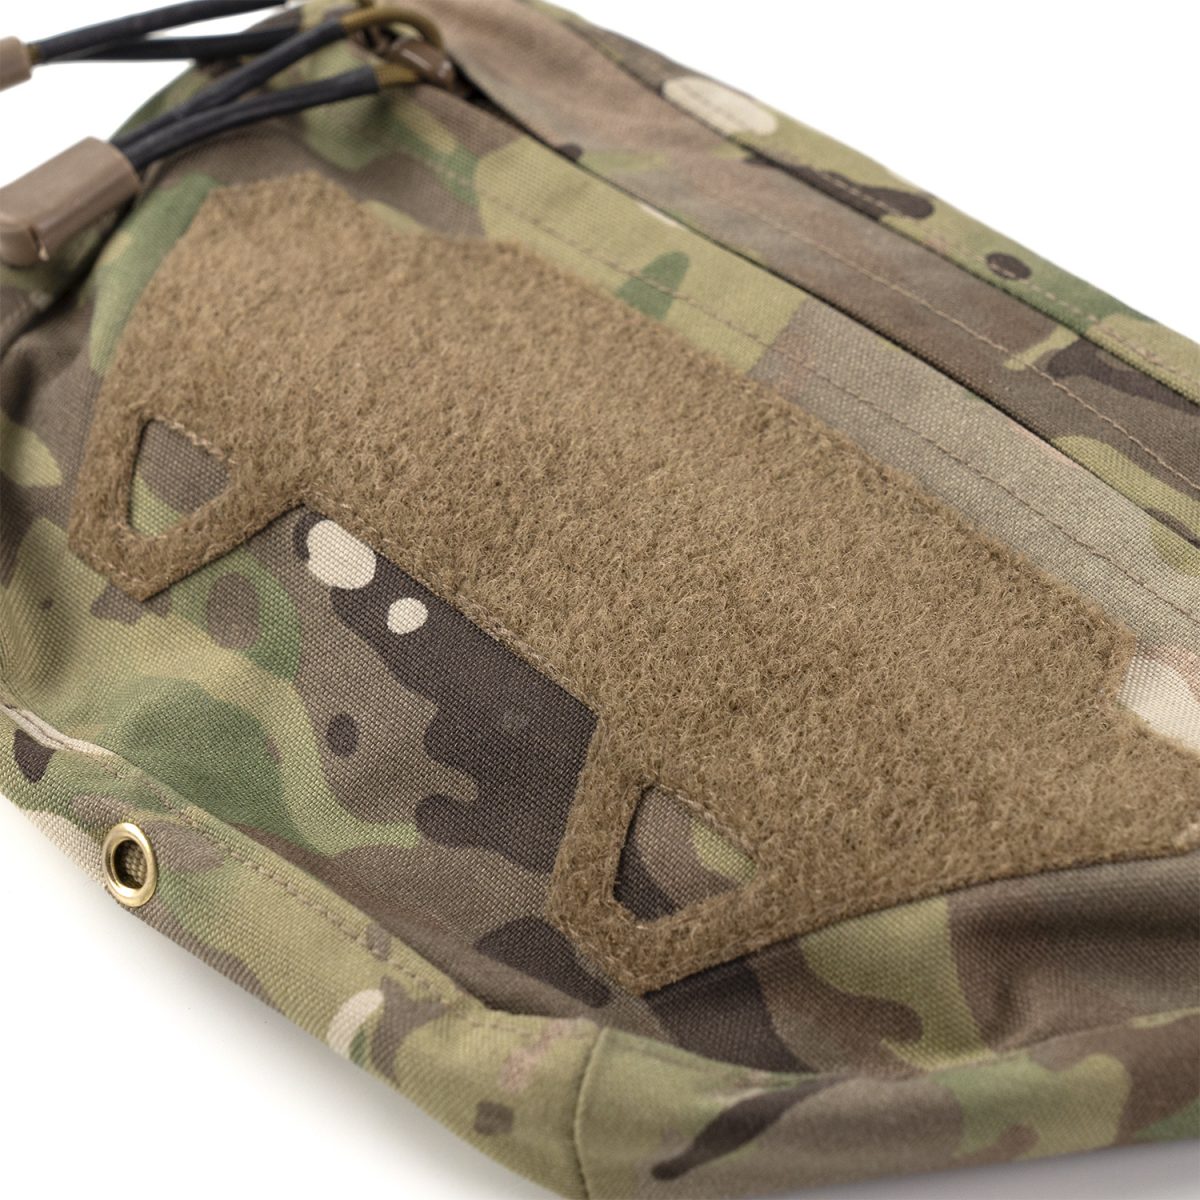 Airsoft Magazine: EMERSON P-FANNY PACK